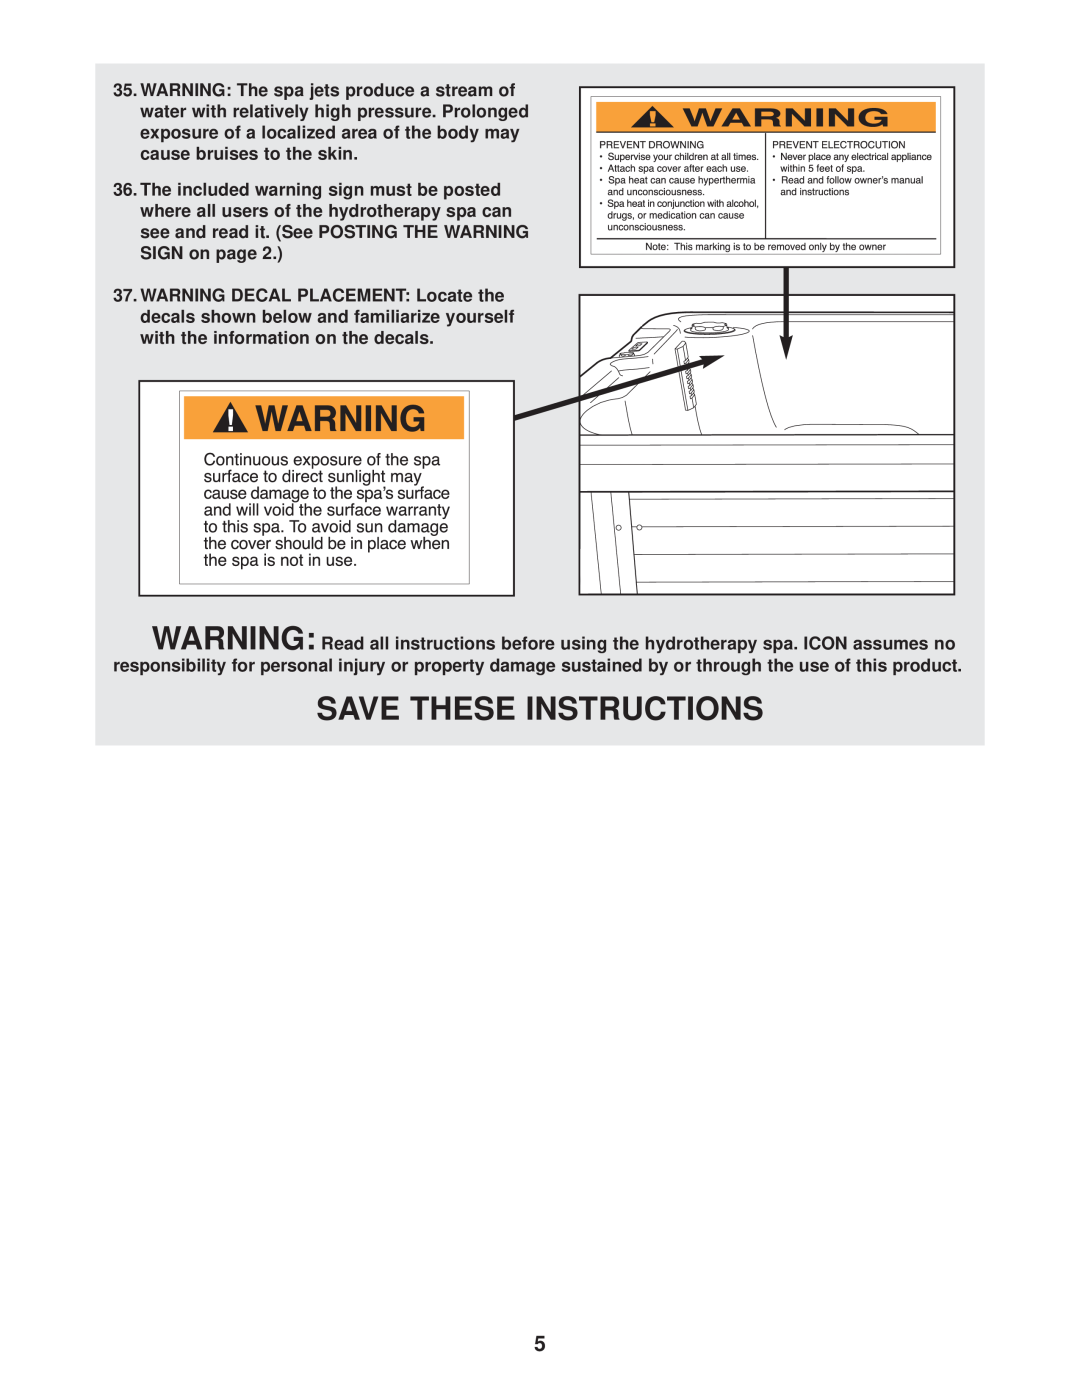 Image IMHS63100 user manual Save These Instructions 